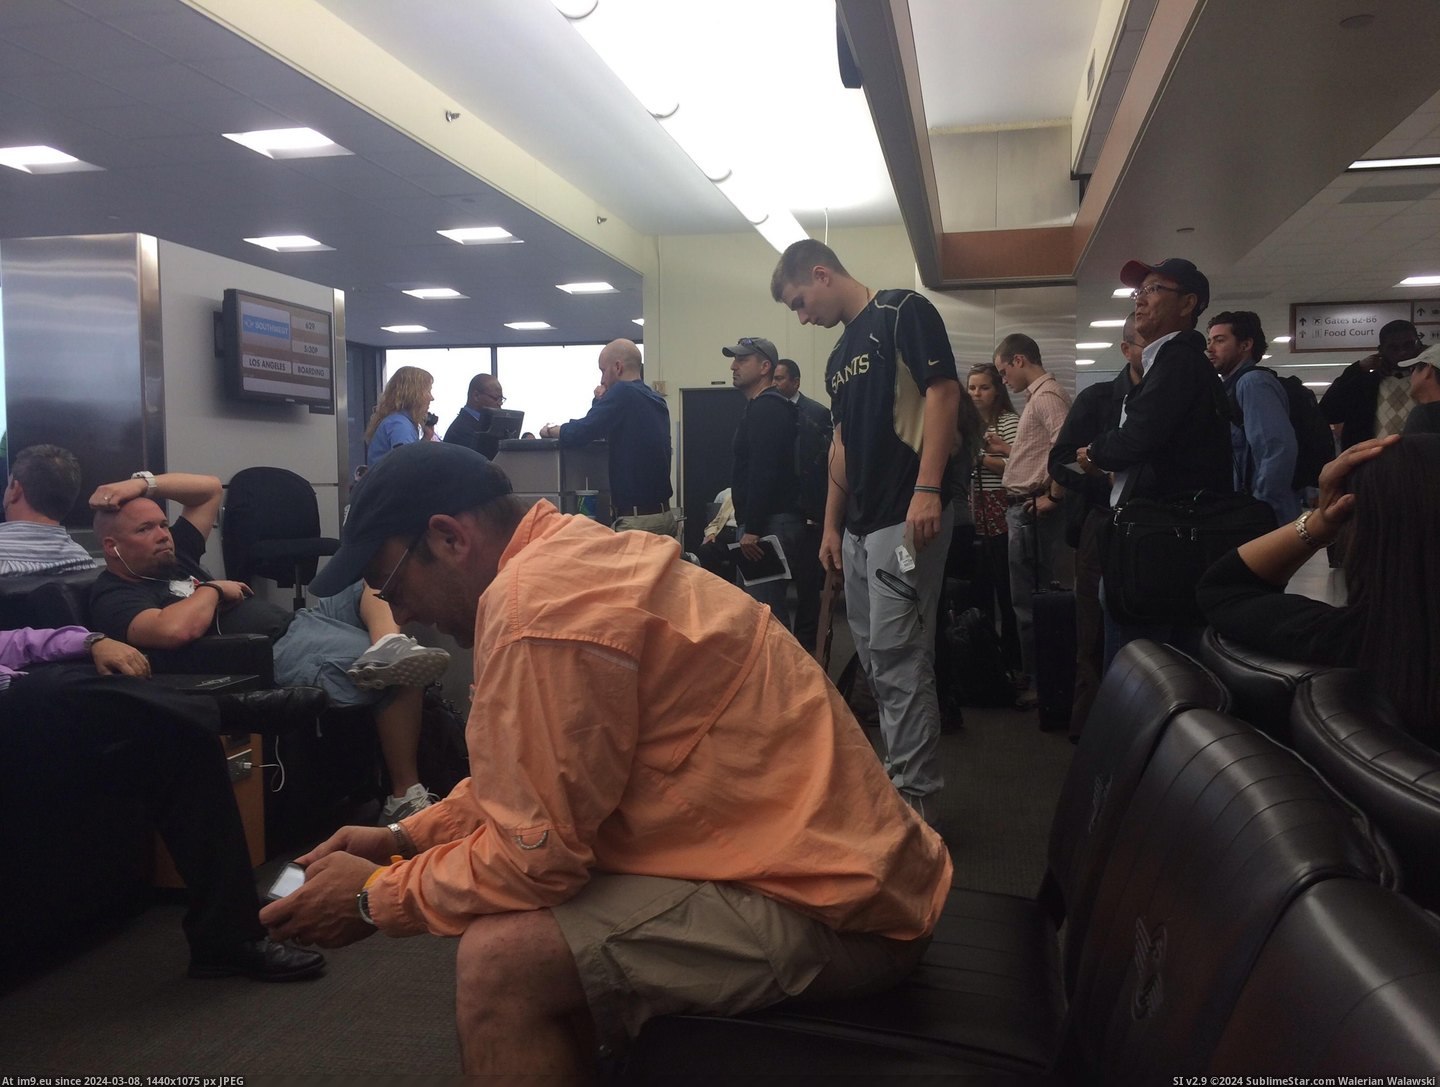 #People #Week #Person #Airport #Southwest #Storms #Misplaced #Changing #Orleans #Ton #Charge [Pics] The storms last week misplaced a ton of people in New Orleans Airport. Southwest only had 1 person in charge of changing  Pic. (Image of album My r/PICS favs))